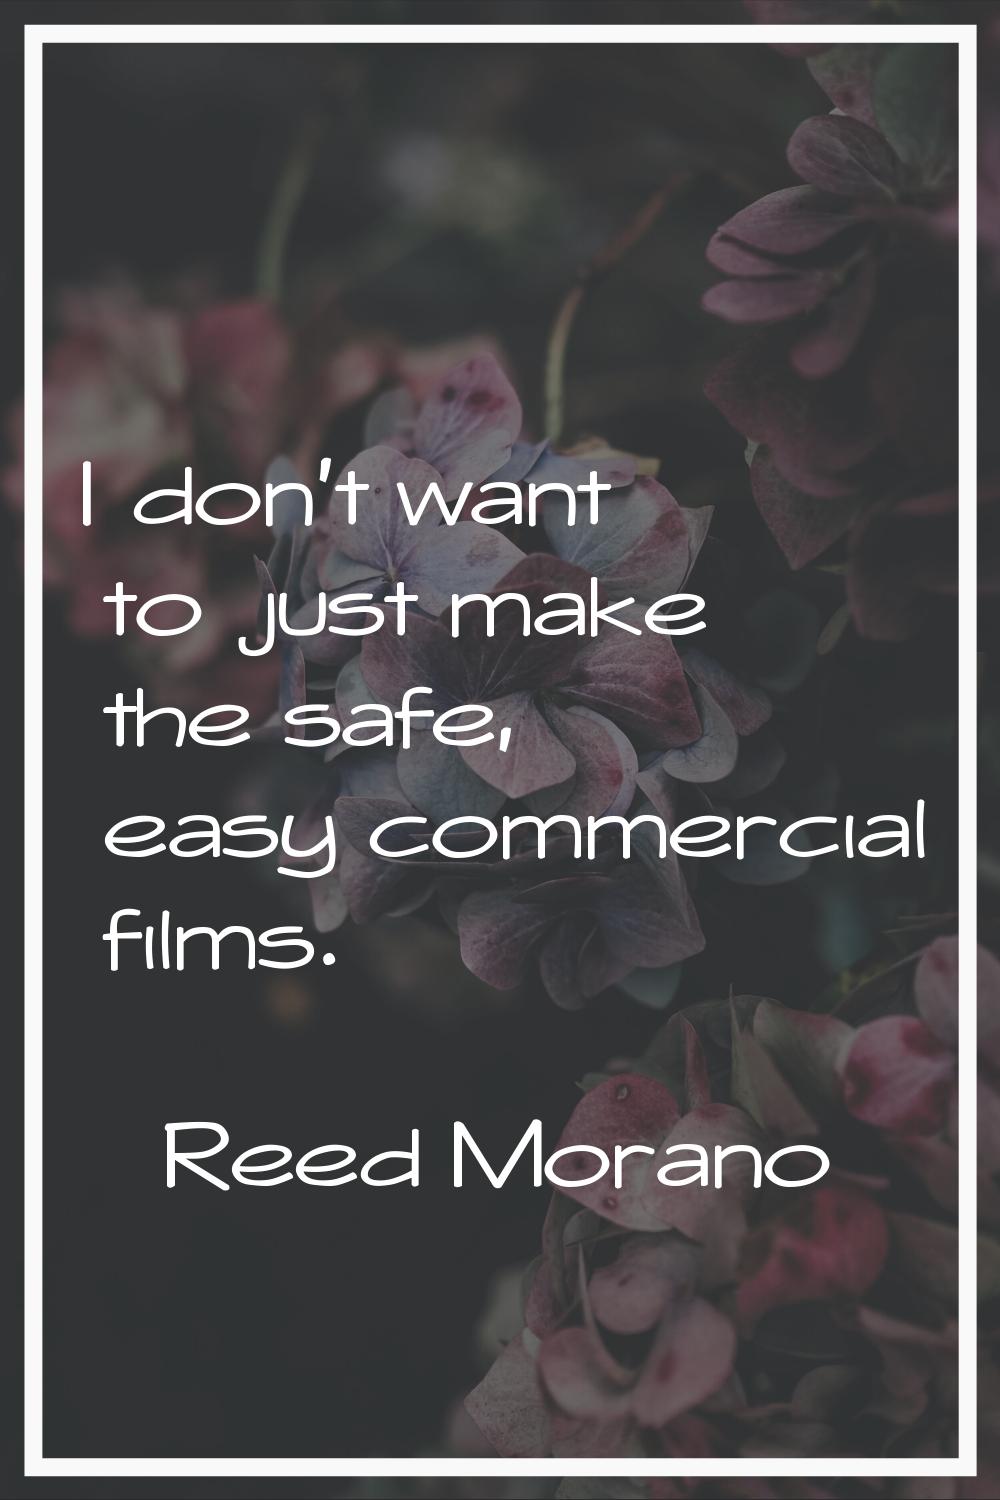 I don't want to just make the safe, easy commercial films.